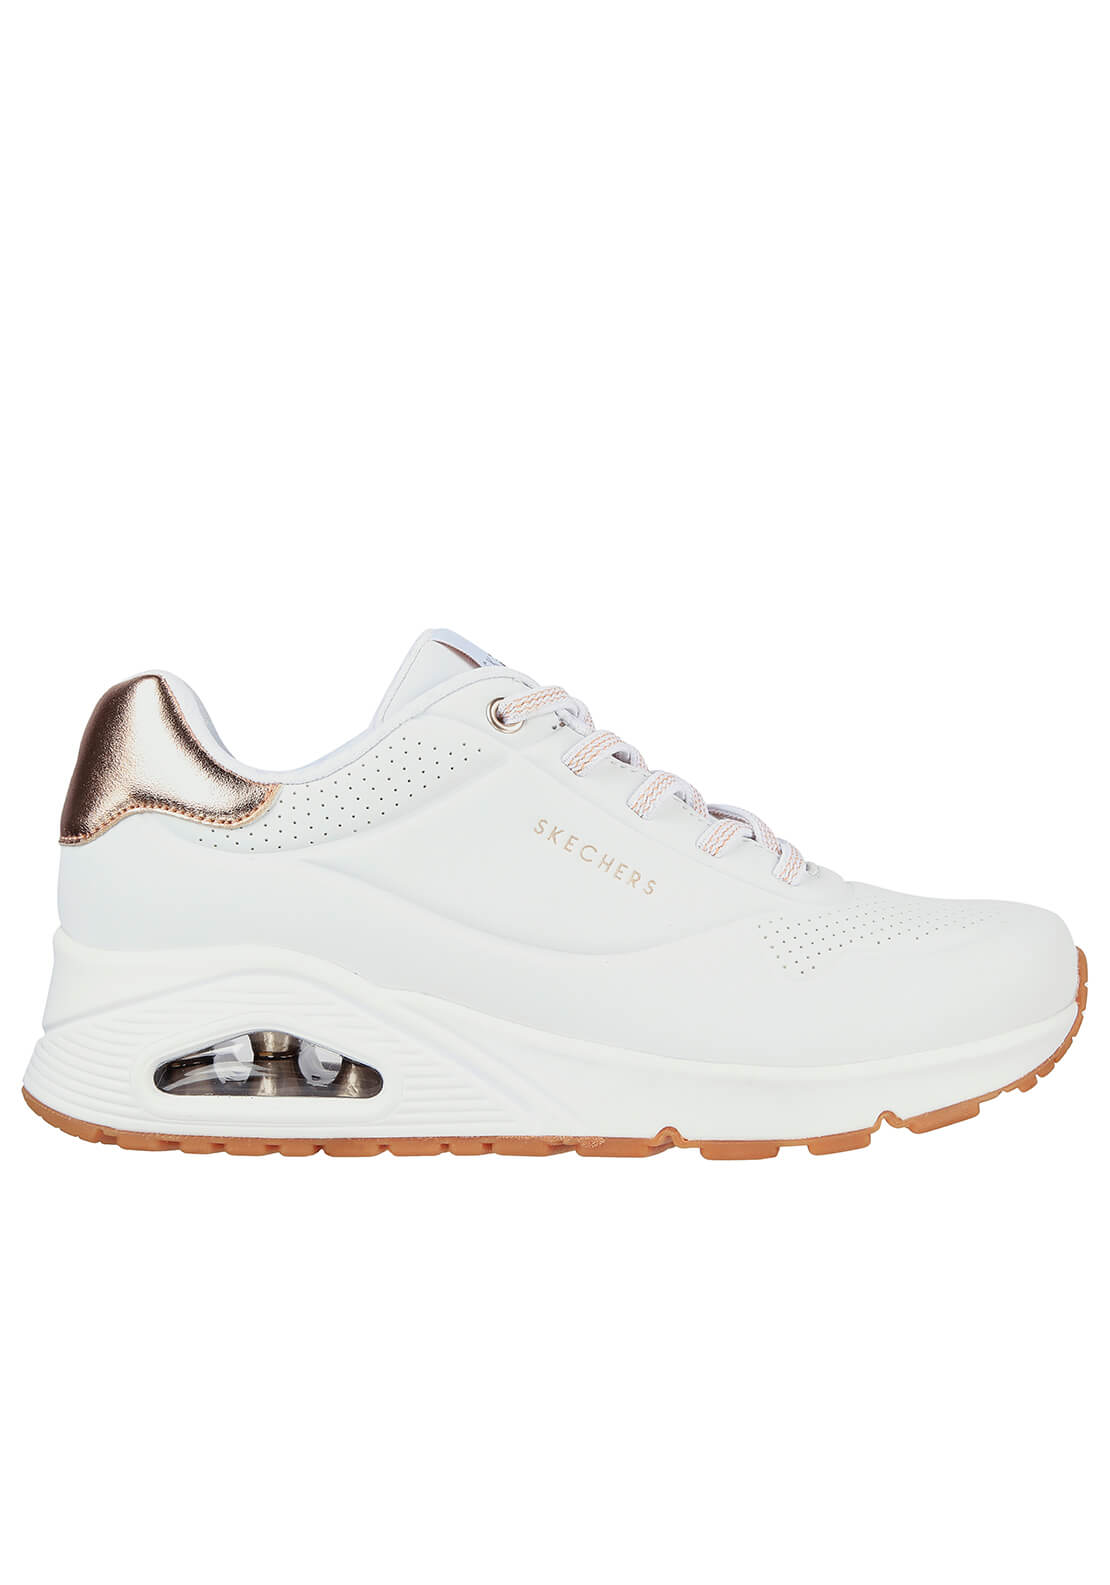 Skechers Street Uno Shimmer Away - White 2 Shaws Department Stores